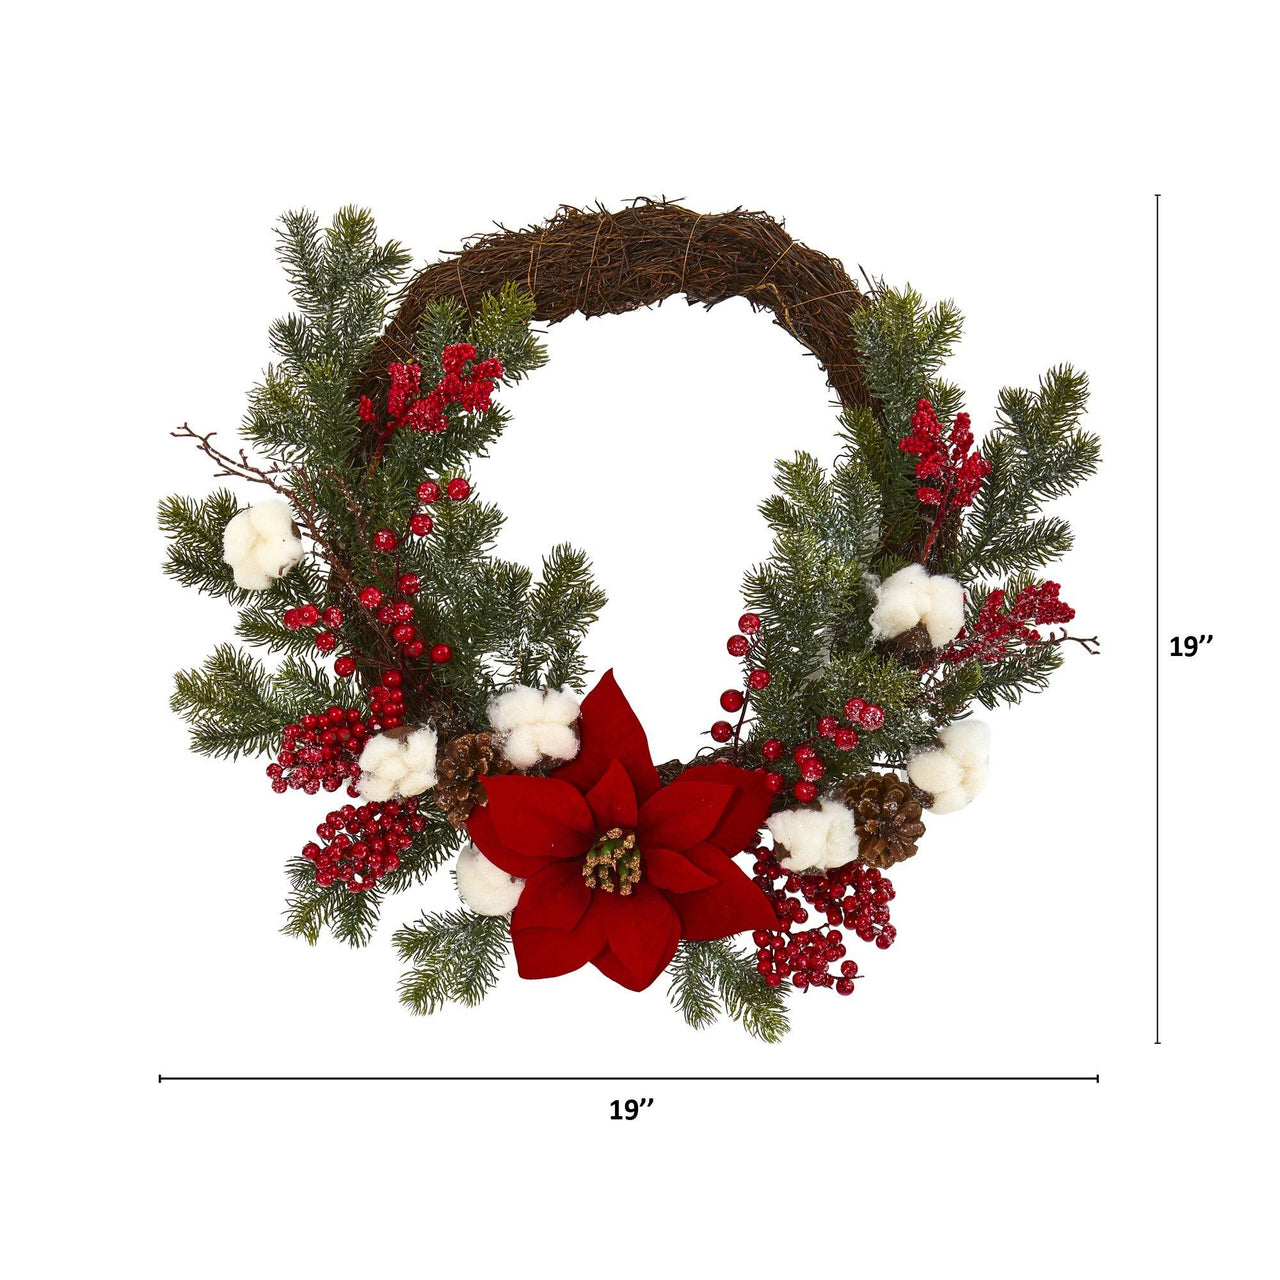 19” Poinsettia with Berries and Cotton Artificial Wreath - The Fox Decor